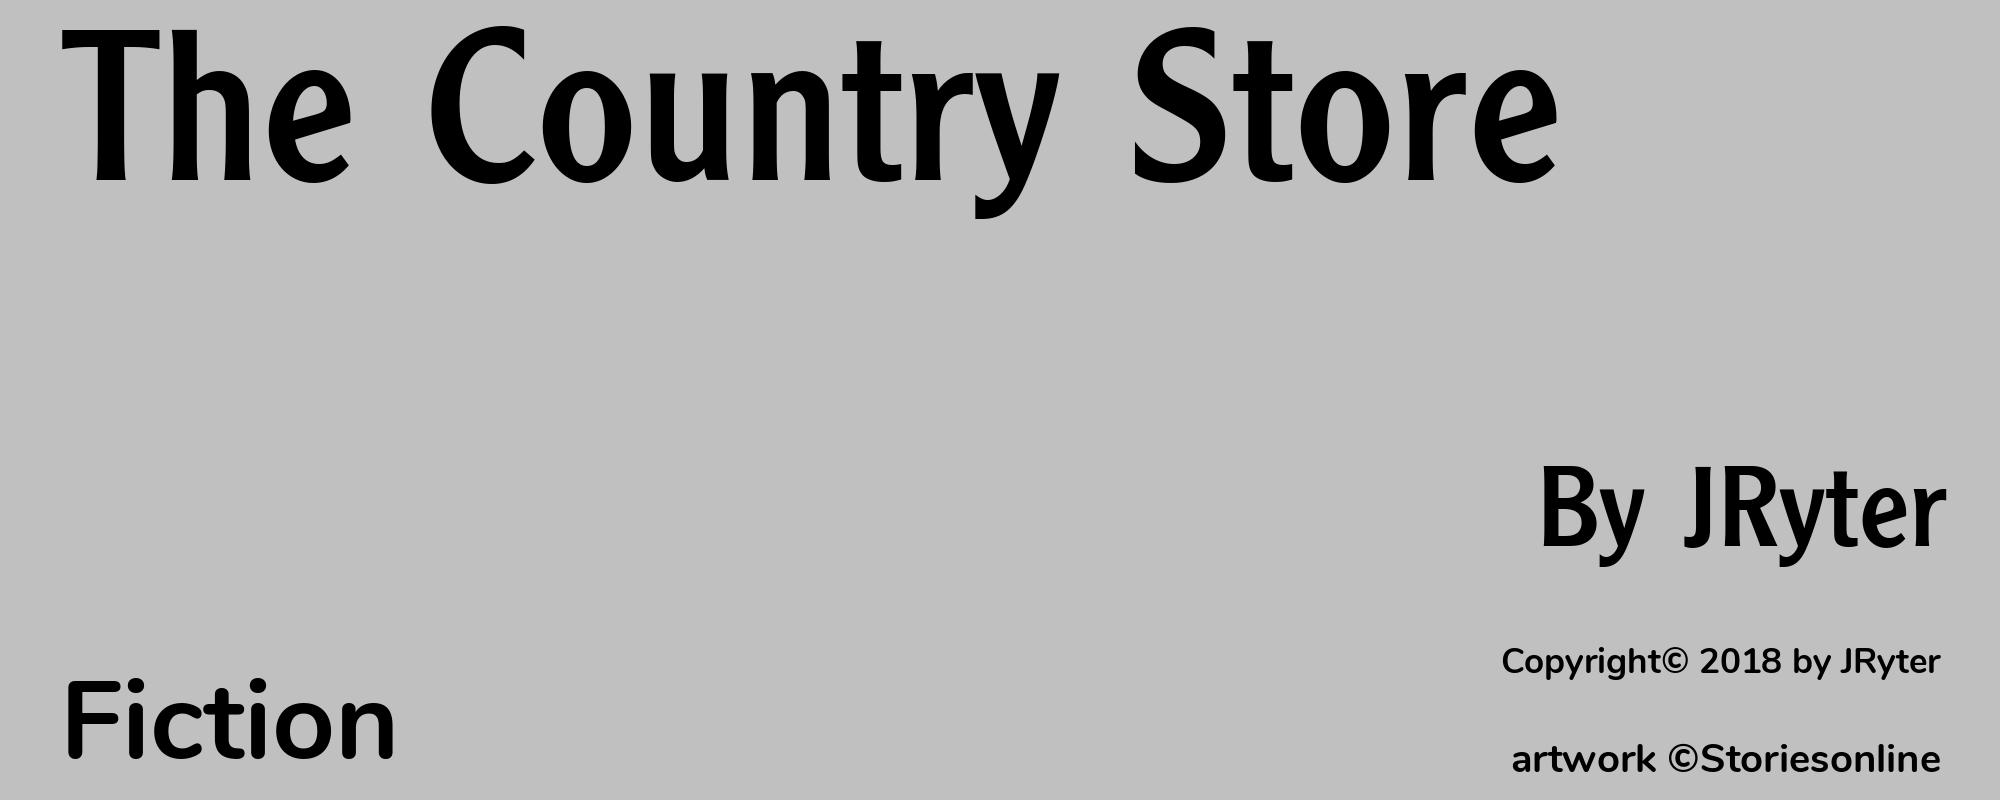 The Country Store - Cover